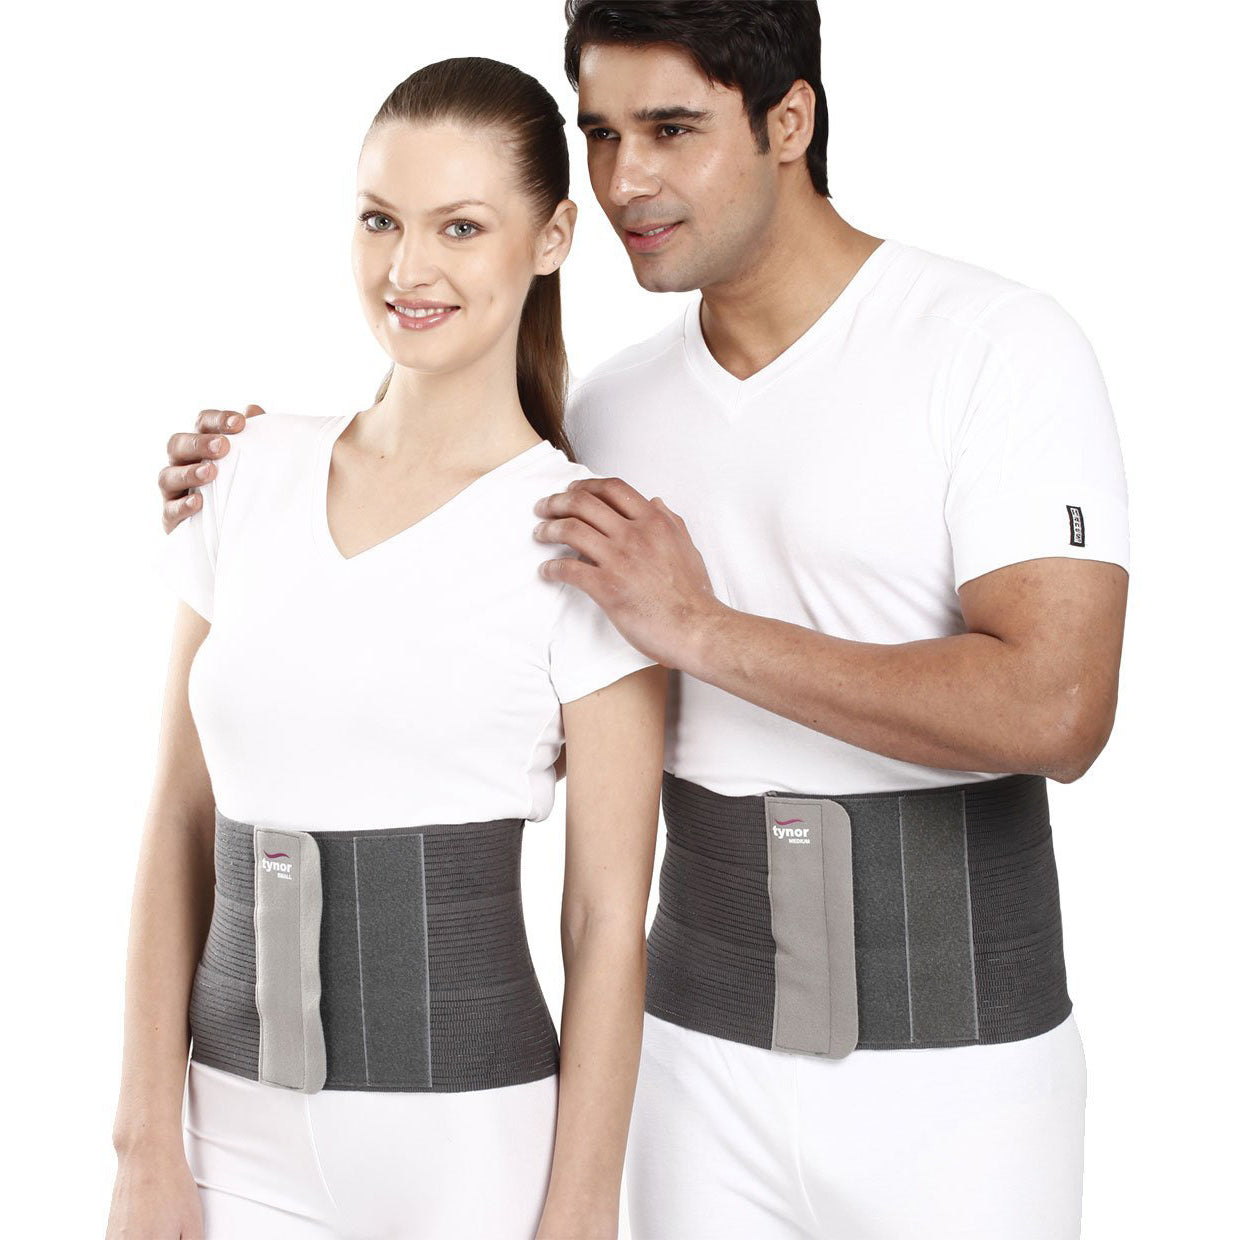 Buy abdominal hernia support belt Wholesale From Experienced Suppliers 